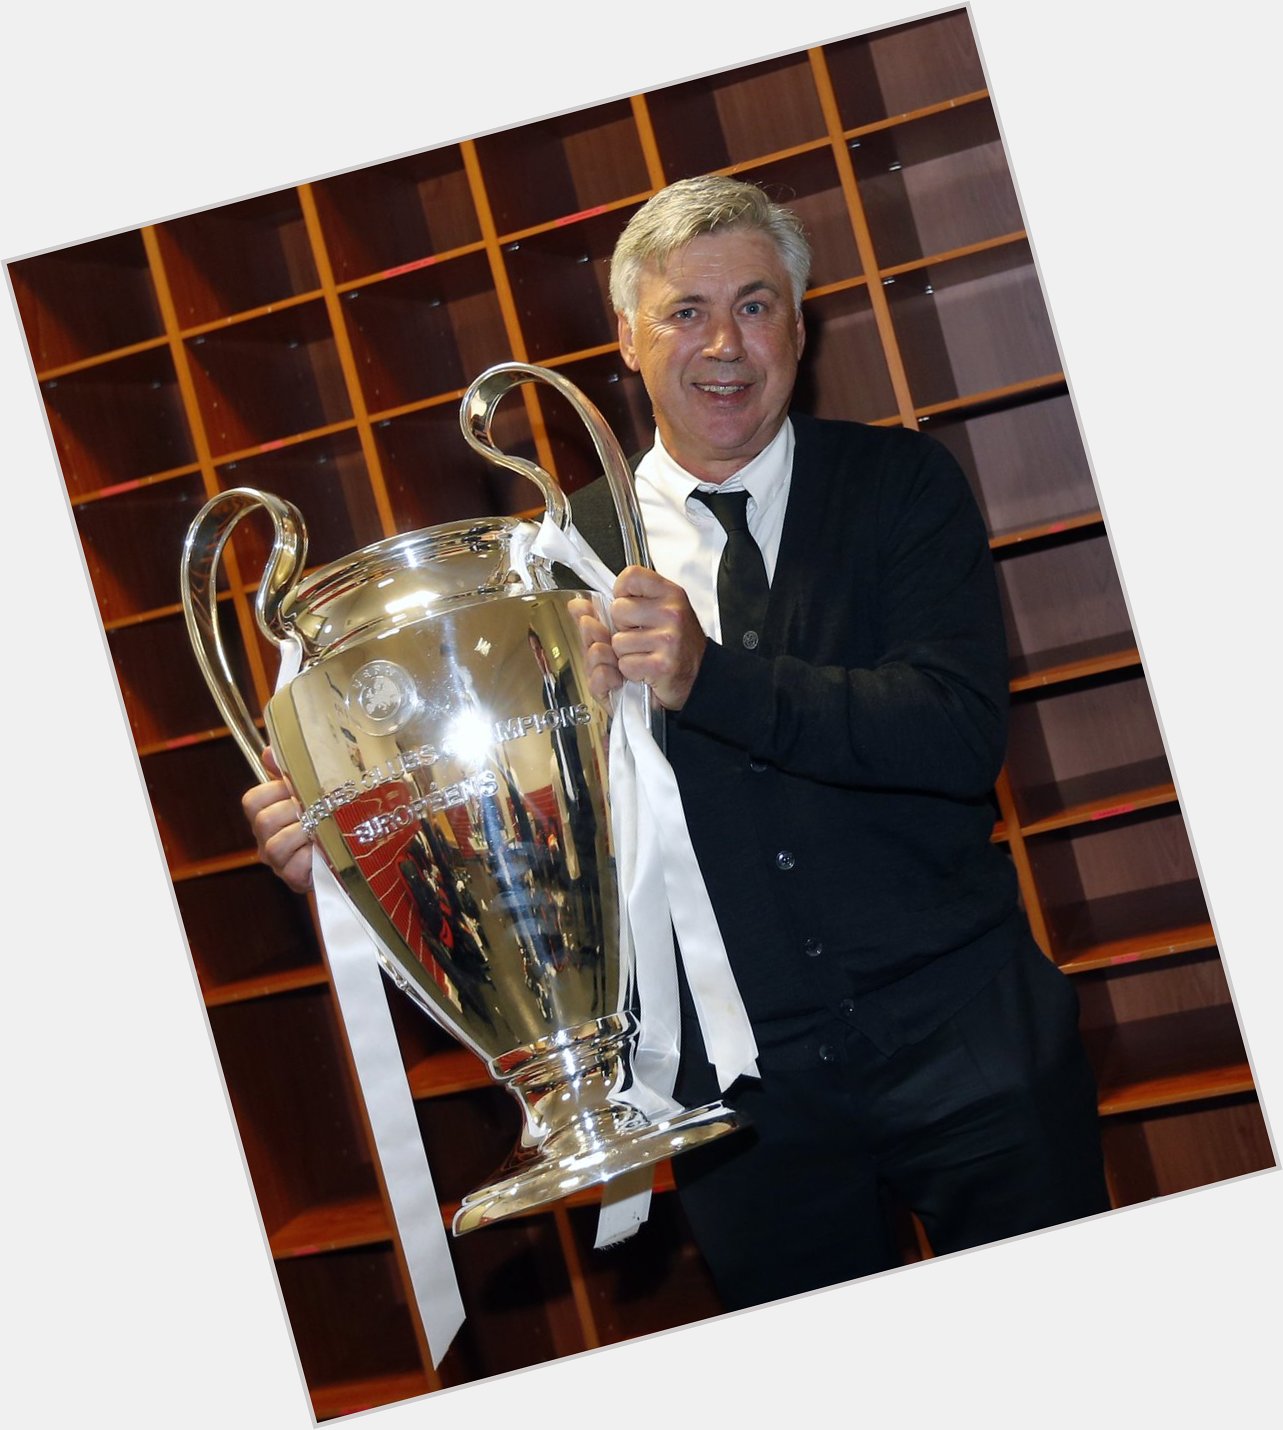 Happy birthday to Carlo Ancelotti. The legendary coach is 6  1  years old today  